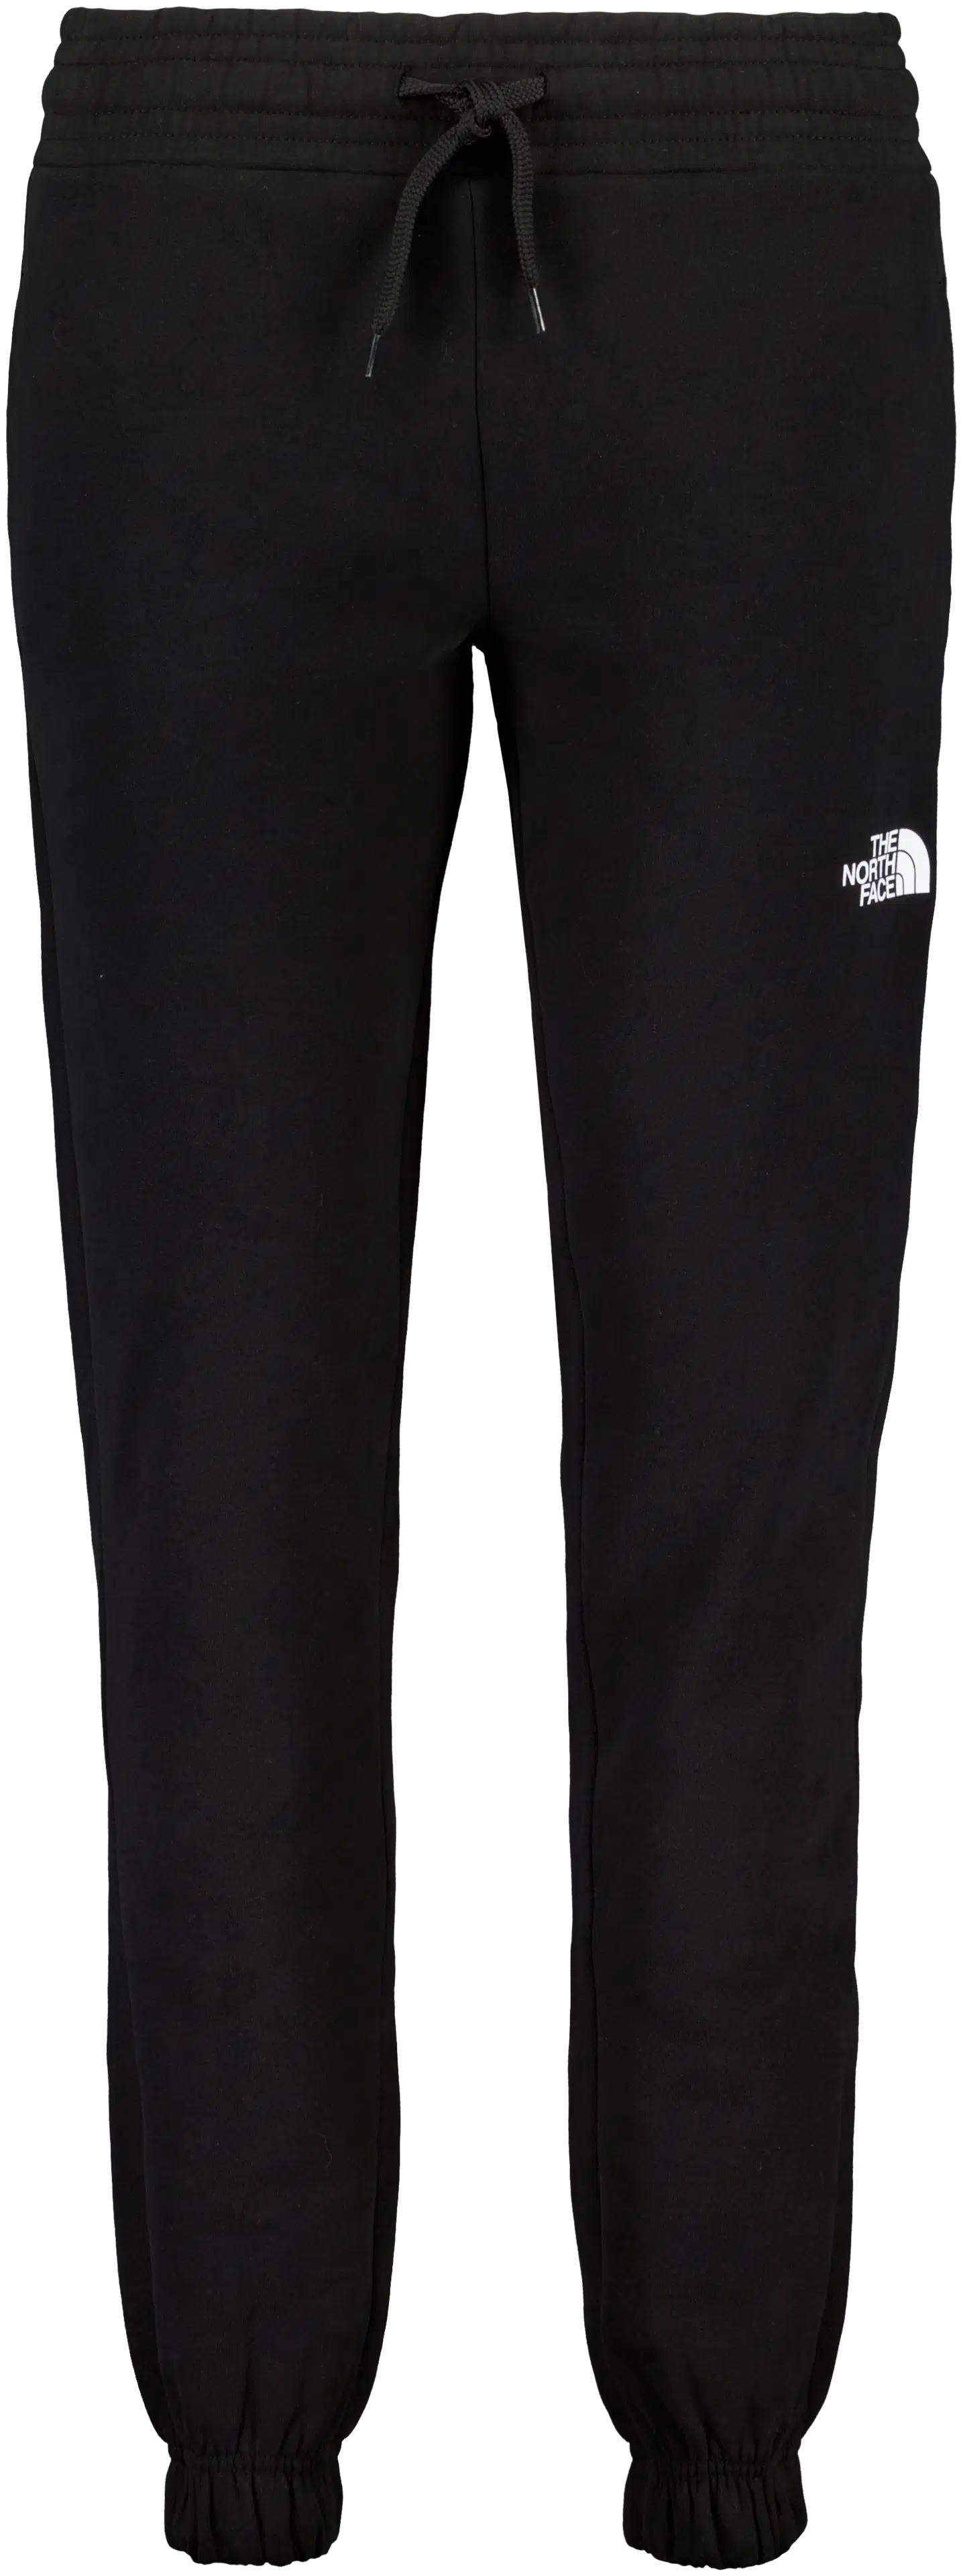 The North Face standard pant housut